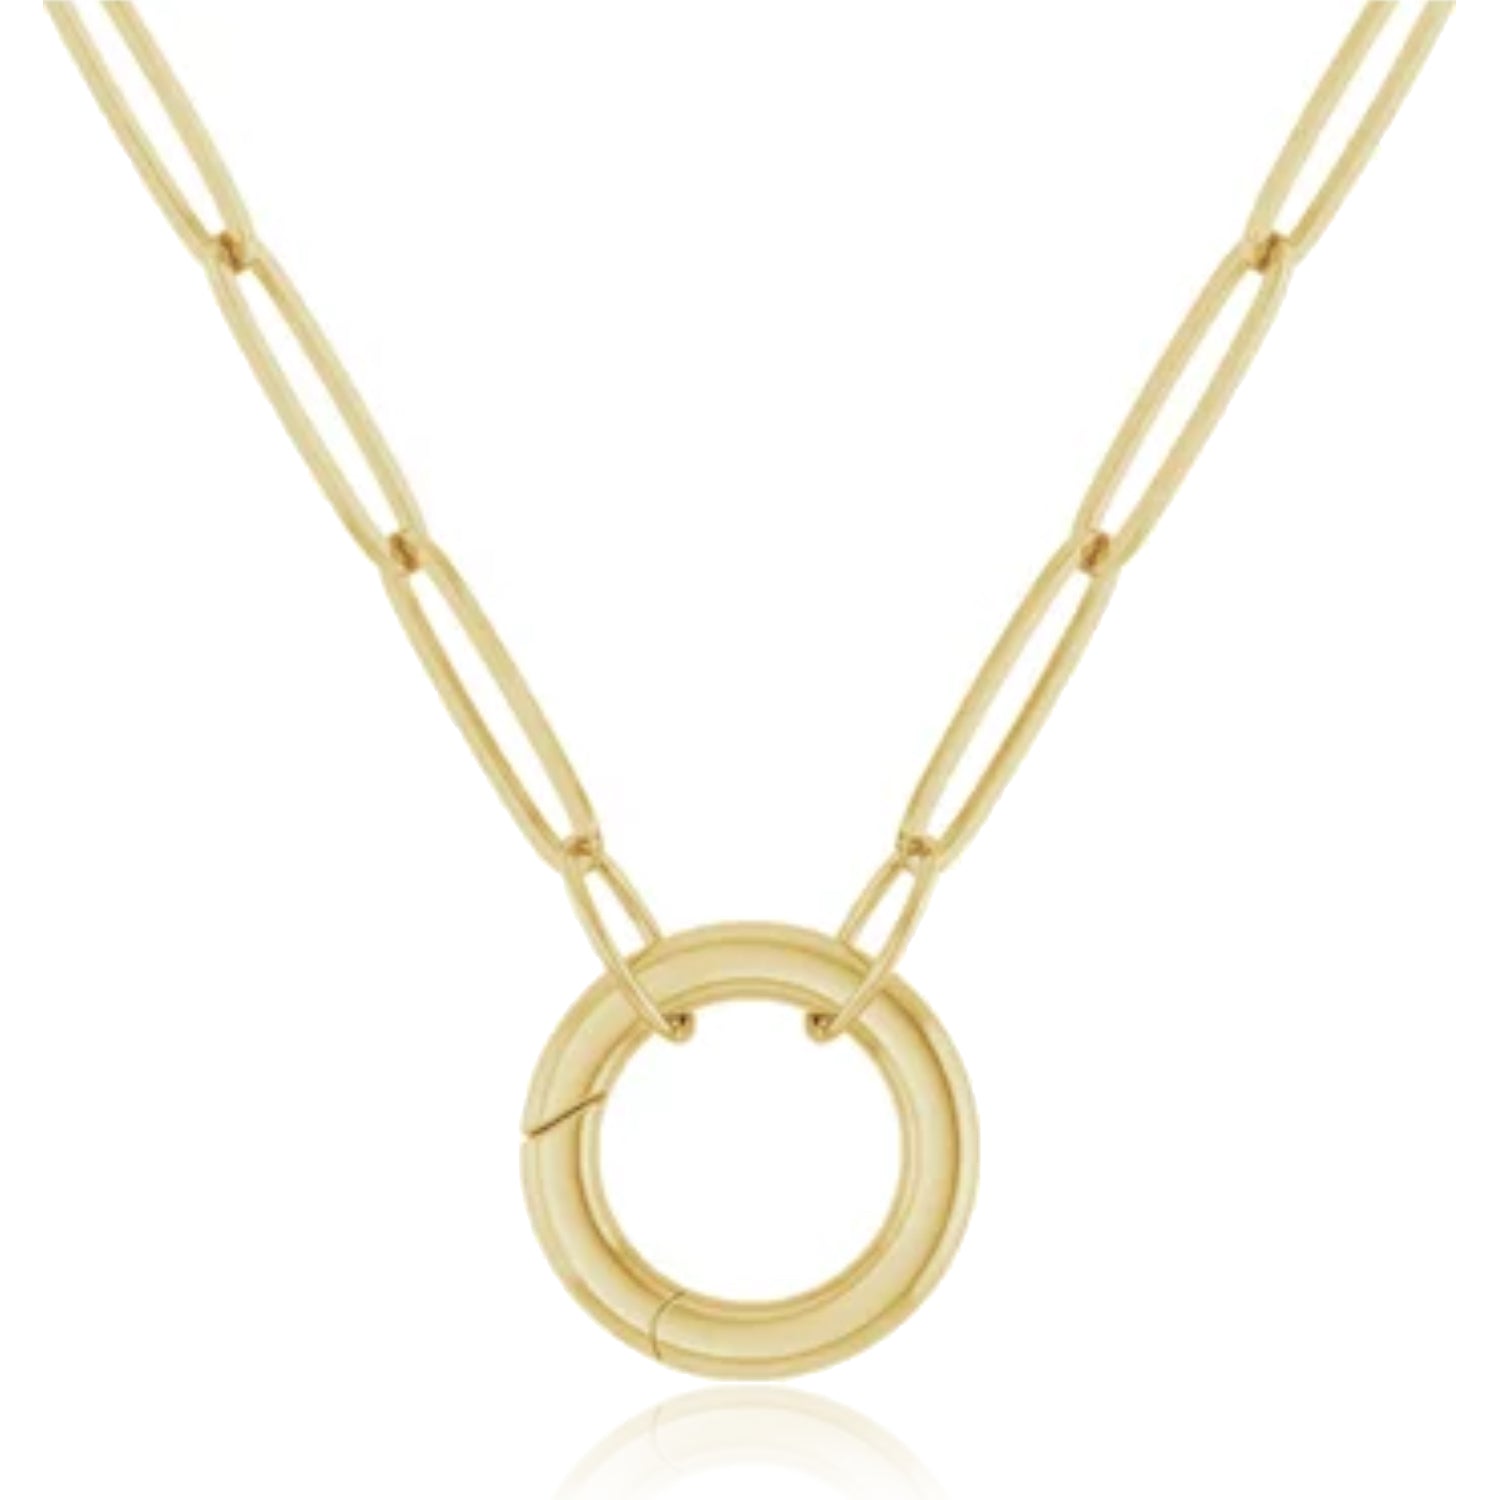 Enhancer Charm Paperclip Link Chain Necklace in Yellow Gold